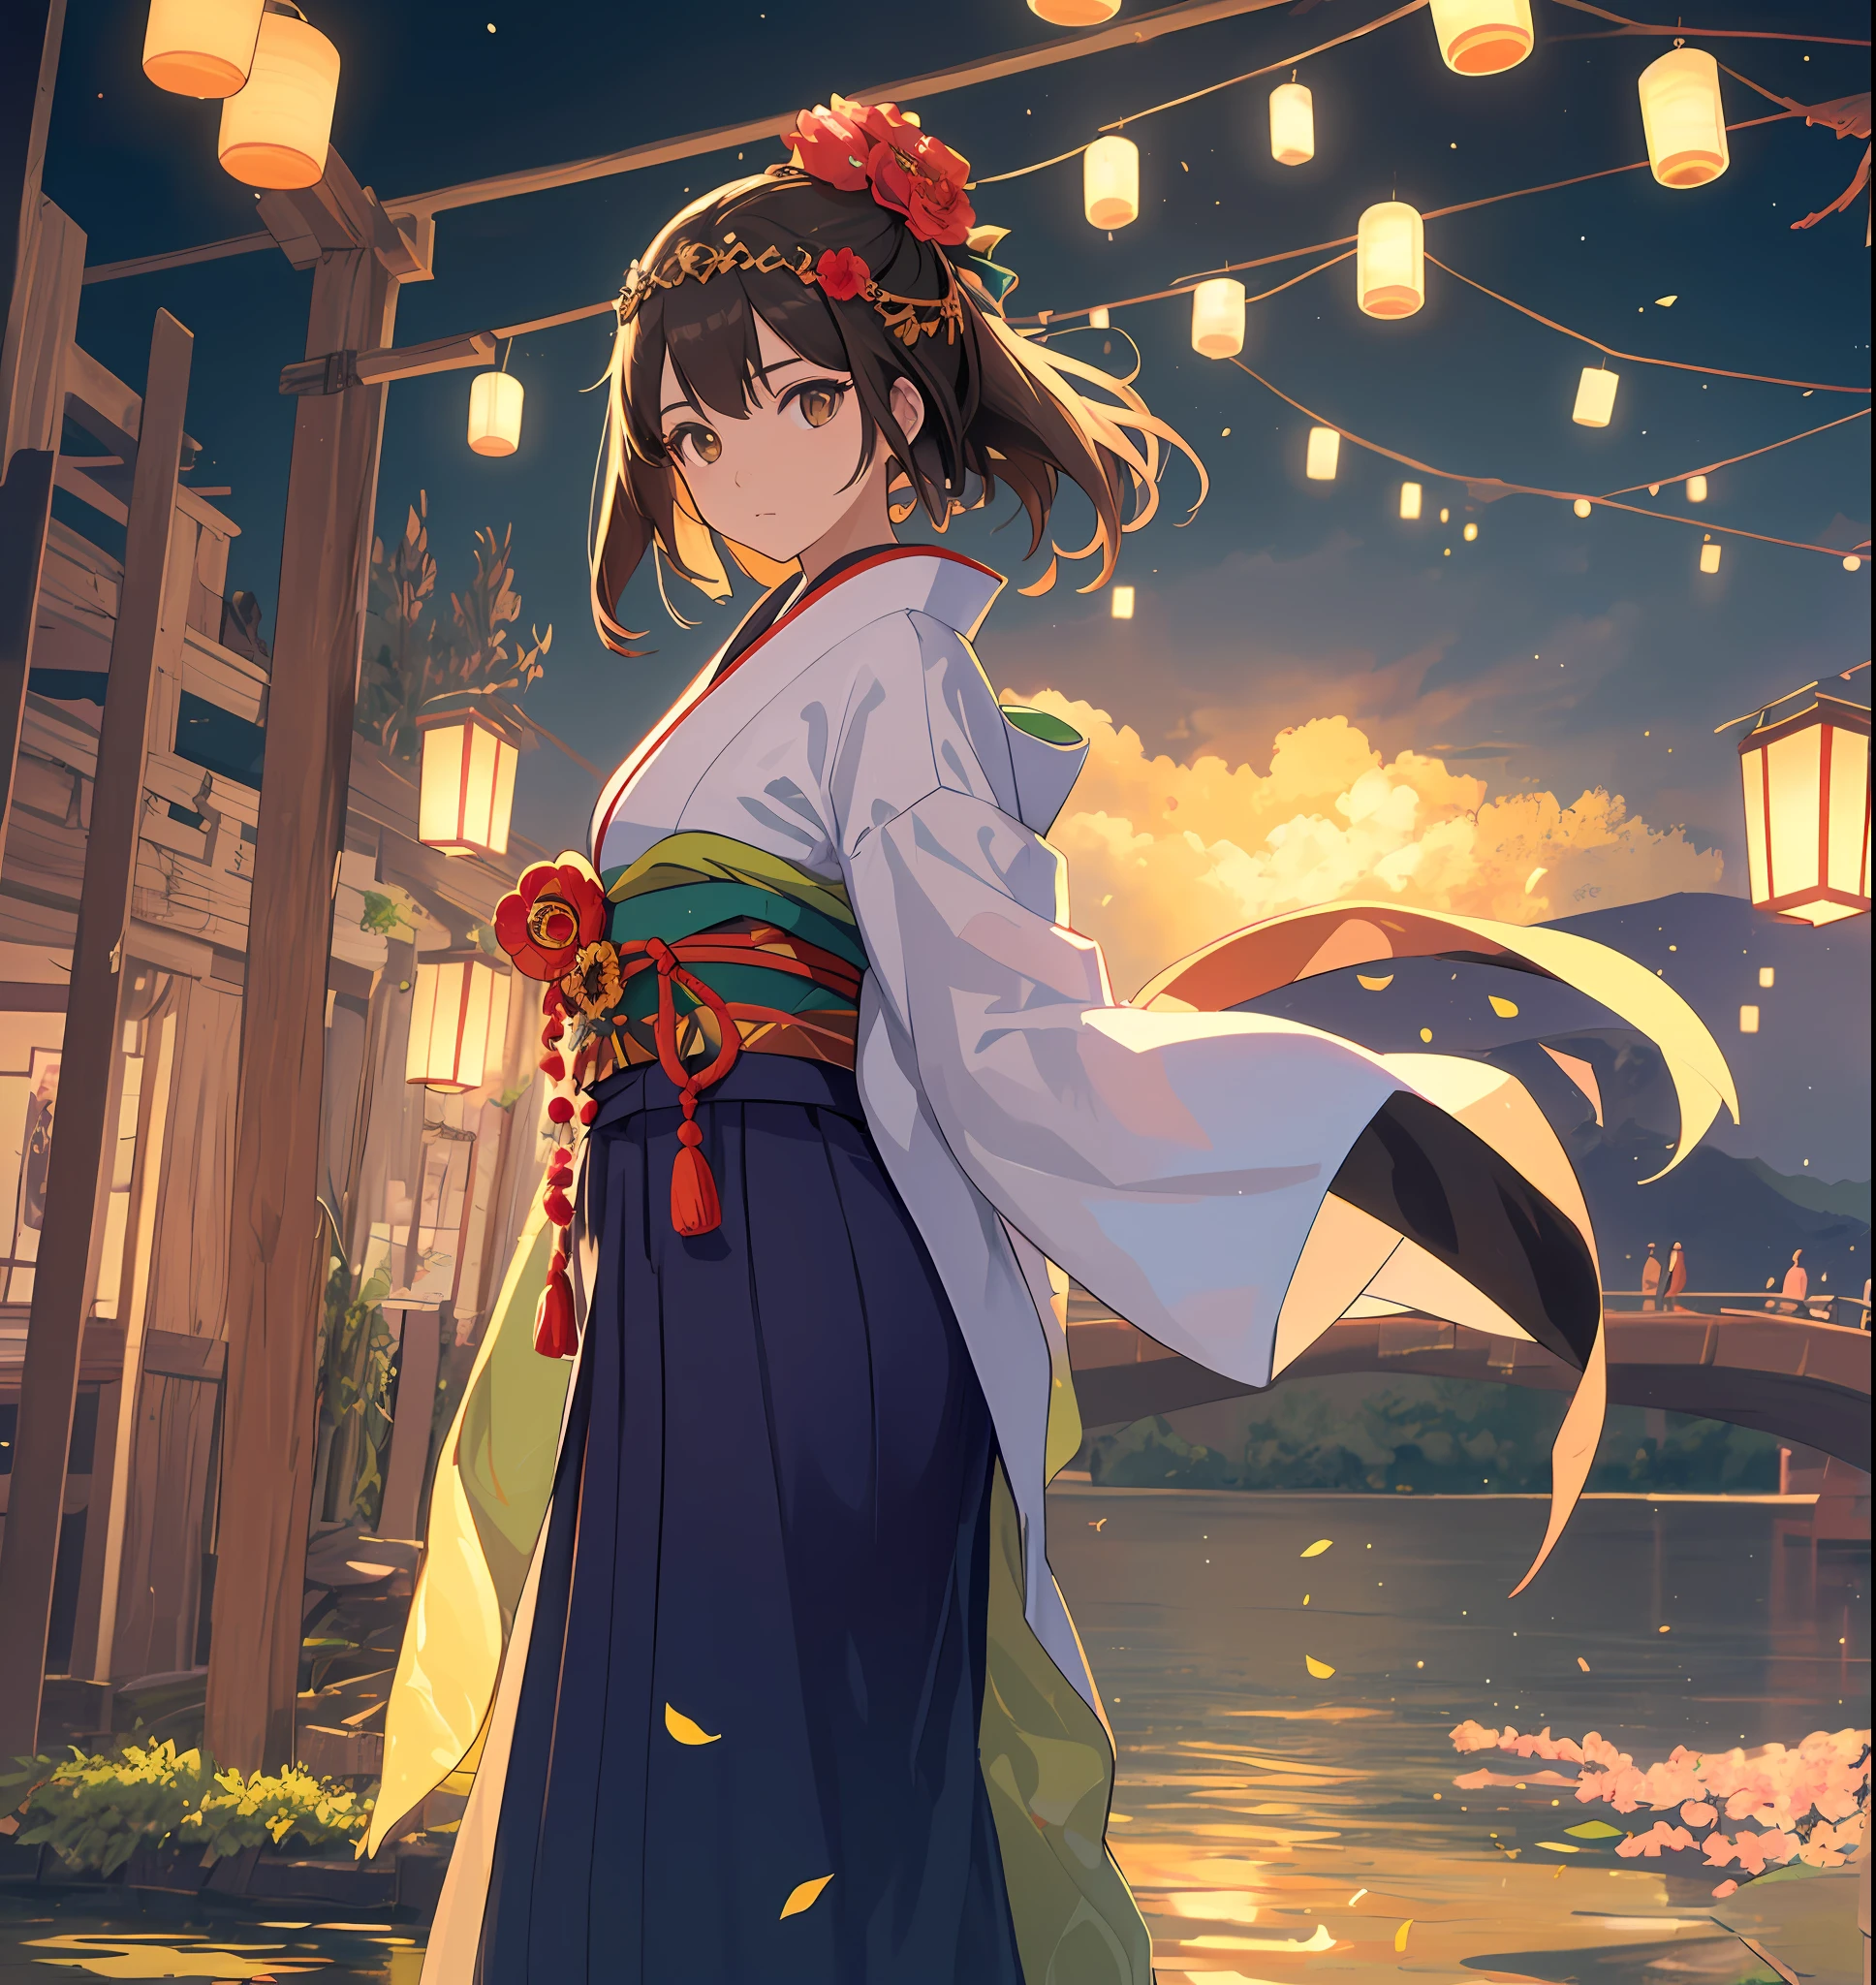 Generate a breathtaking 3D image in the style of MJ3D and Ghibli, inspired by the character 'Spirited Away' (Sen/Chihiro) from the renowned Studio Ghibli film. The image should portray a young girl with long brown hair, adorned with a floral circlet. She is wearing a traditional Japanese kimono with intricate patterns and vibrant colors. The kimono has billowing sleeves and is cinched at the waist with an elegant obi. The girl has soft, gentle features with warm brown eyes and a serene expression. Her hair is partially tied back, with loose strands framing her face. She is standing near a flowing river in a magical world, surrounded by floating lanterns and ethereal creatures. The scene is set during twilight, with a soft, golden glow illuminating the landscape. The image should capture the girl's sense of wonder and curiosity as she gazes at the enchanting surroundings. The level of detail and realism should be of the highest caliber, akin to a true masterpiece (best quality: 1.1)